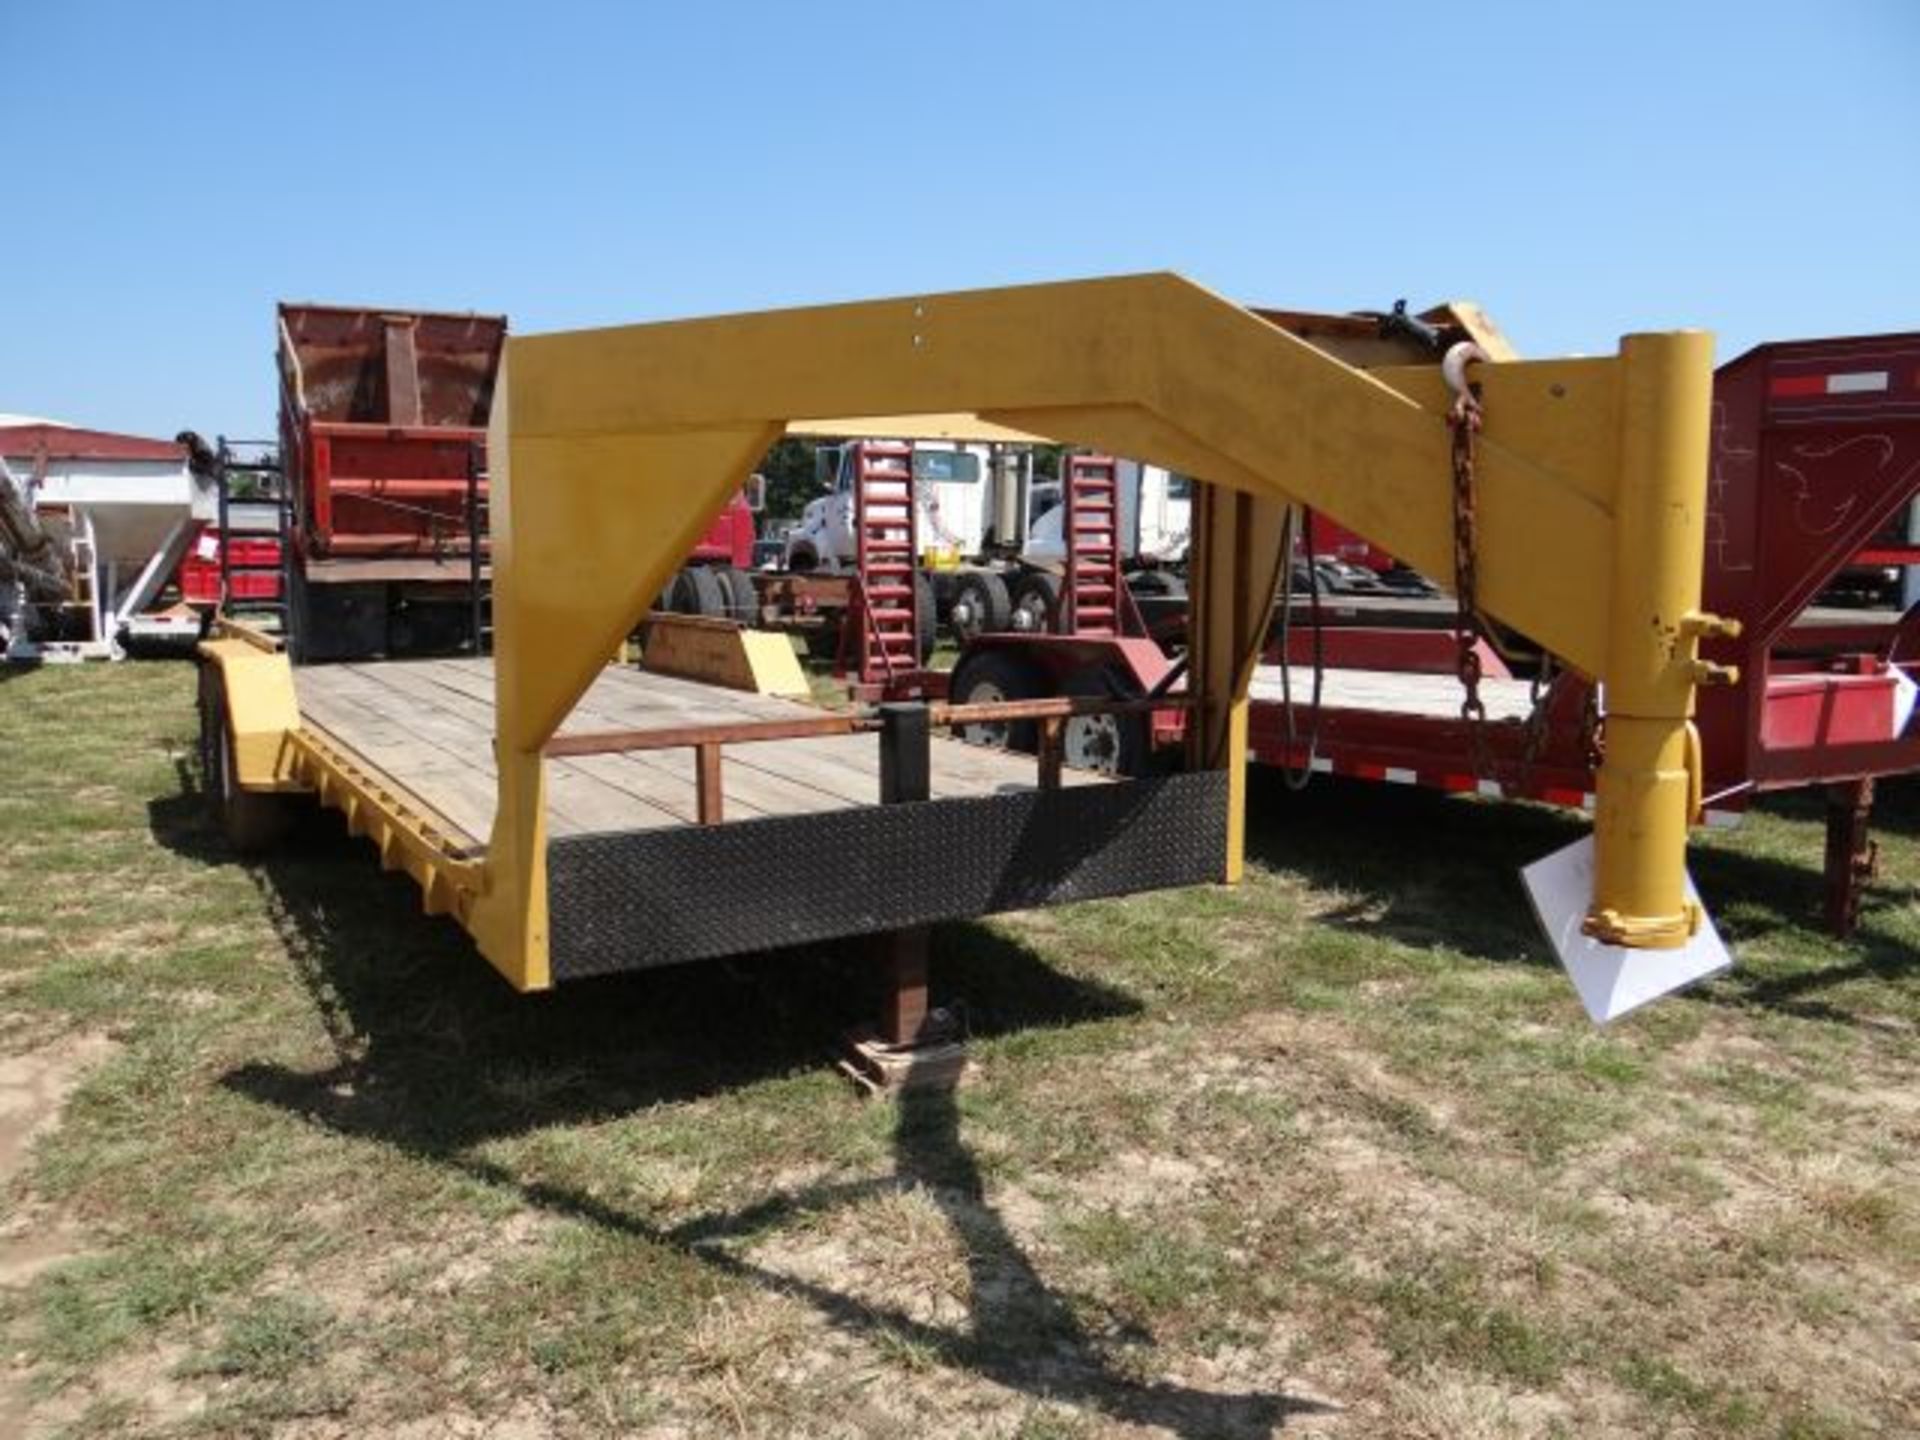 2002 Coose Flatbed Trailer 22' w/2' Dovetail, Gooseneck, New Hancook 14 ply Tires, New Treated - Image 2 of 3